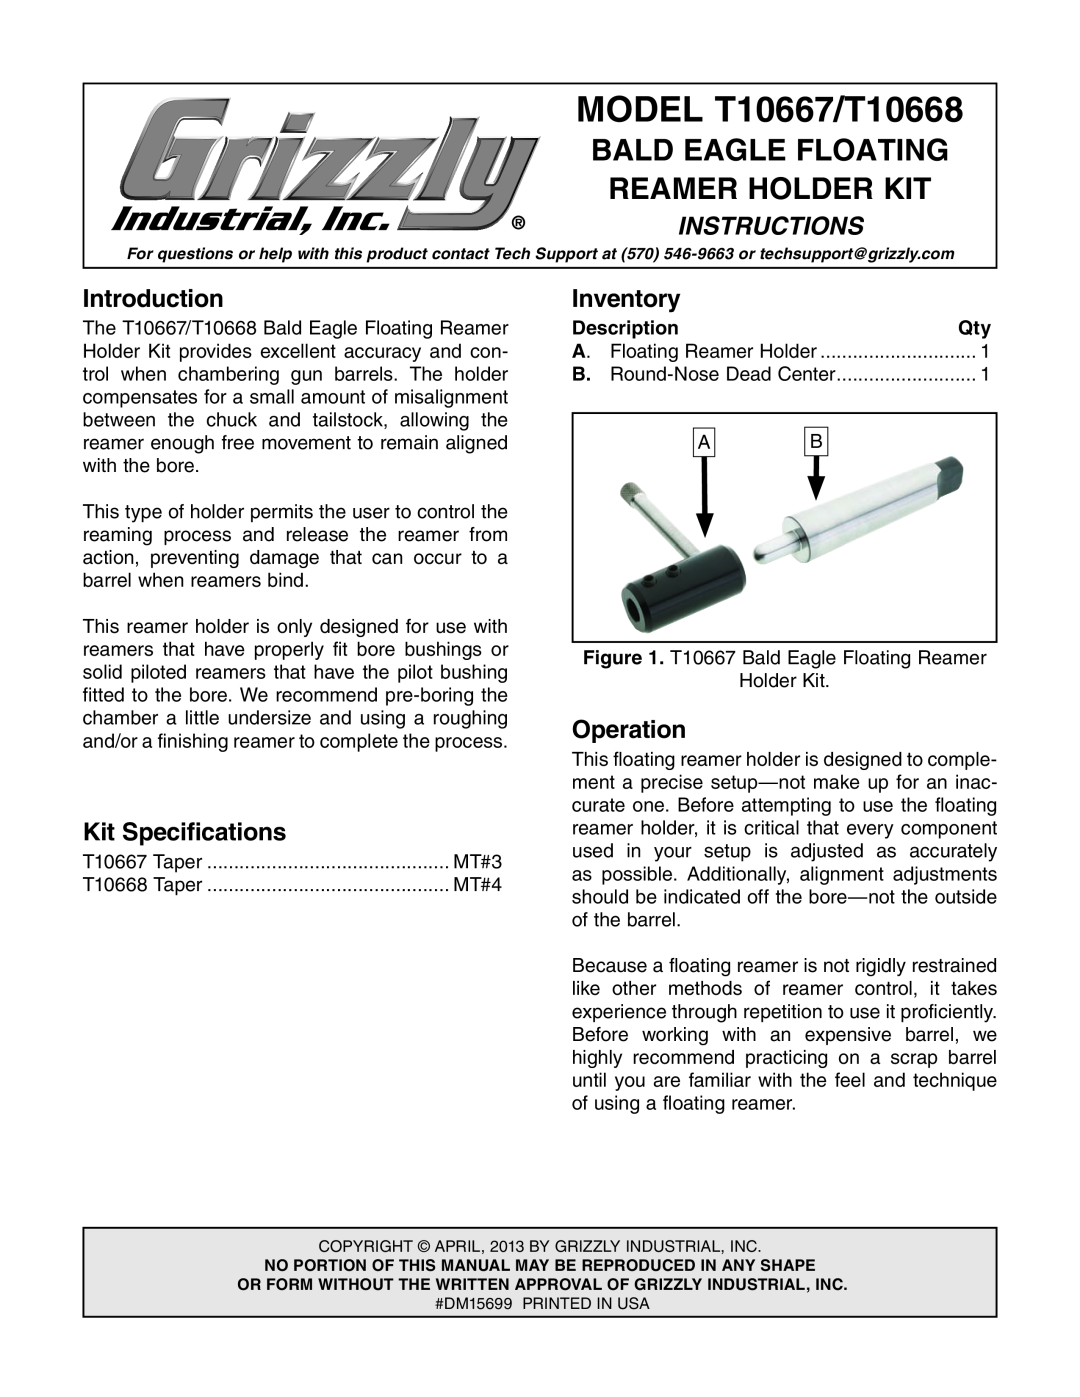 Grizzly specifications Description, A. Floating Reamer Holder, MODEL T10667/T10668, Bald Eagle Floating, Introduction 